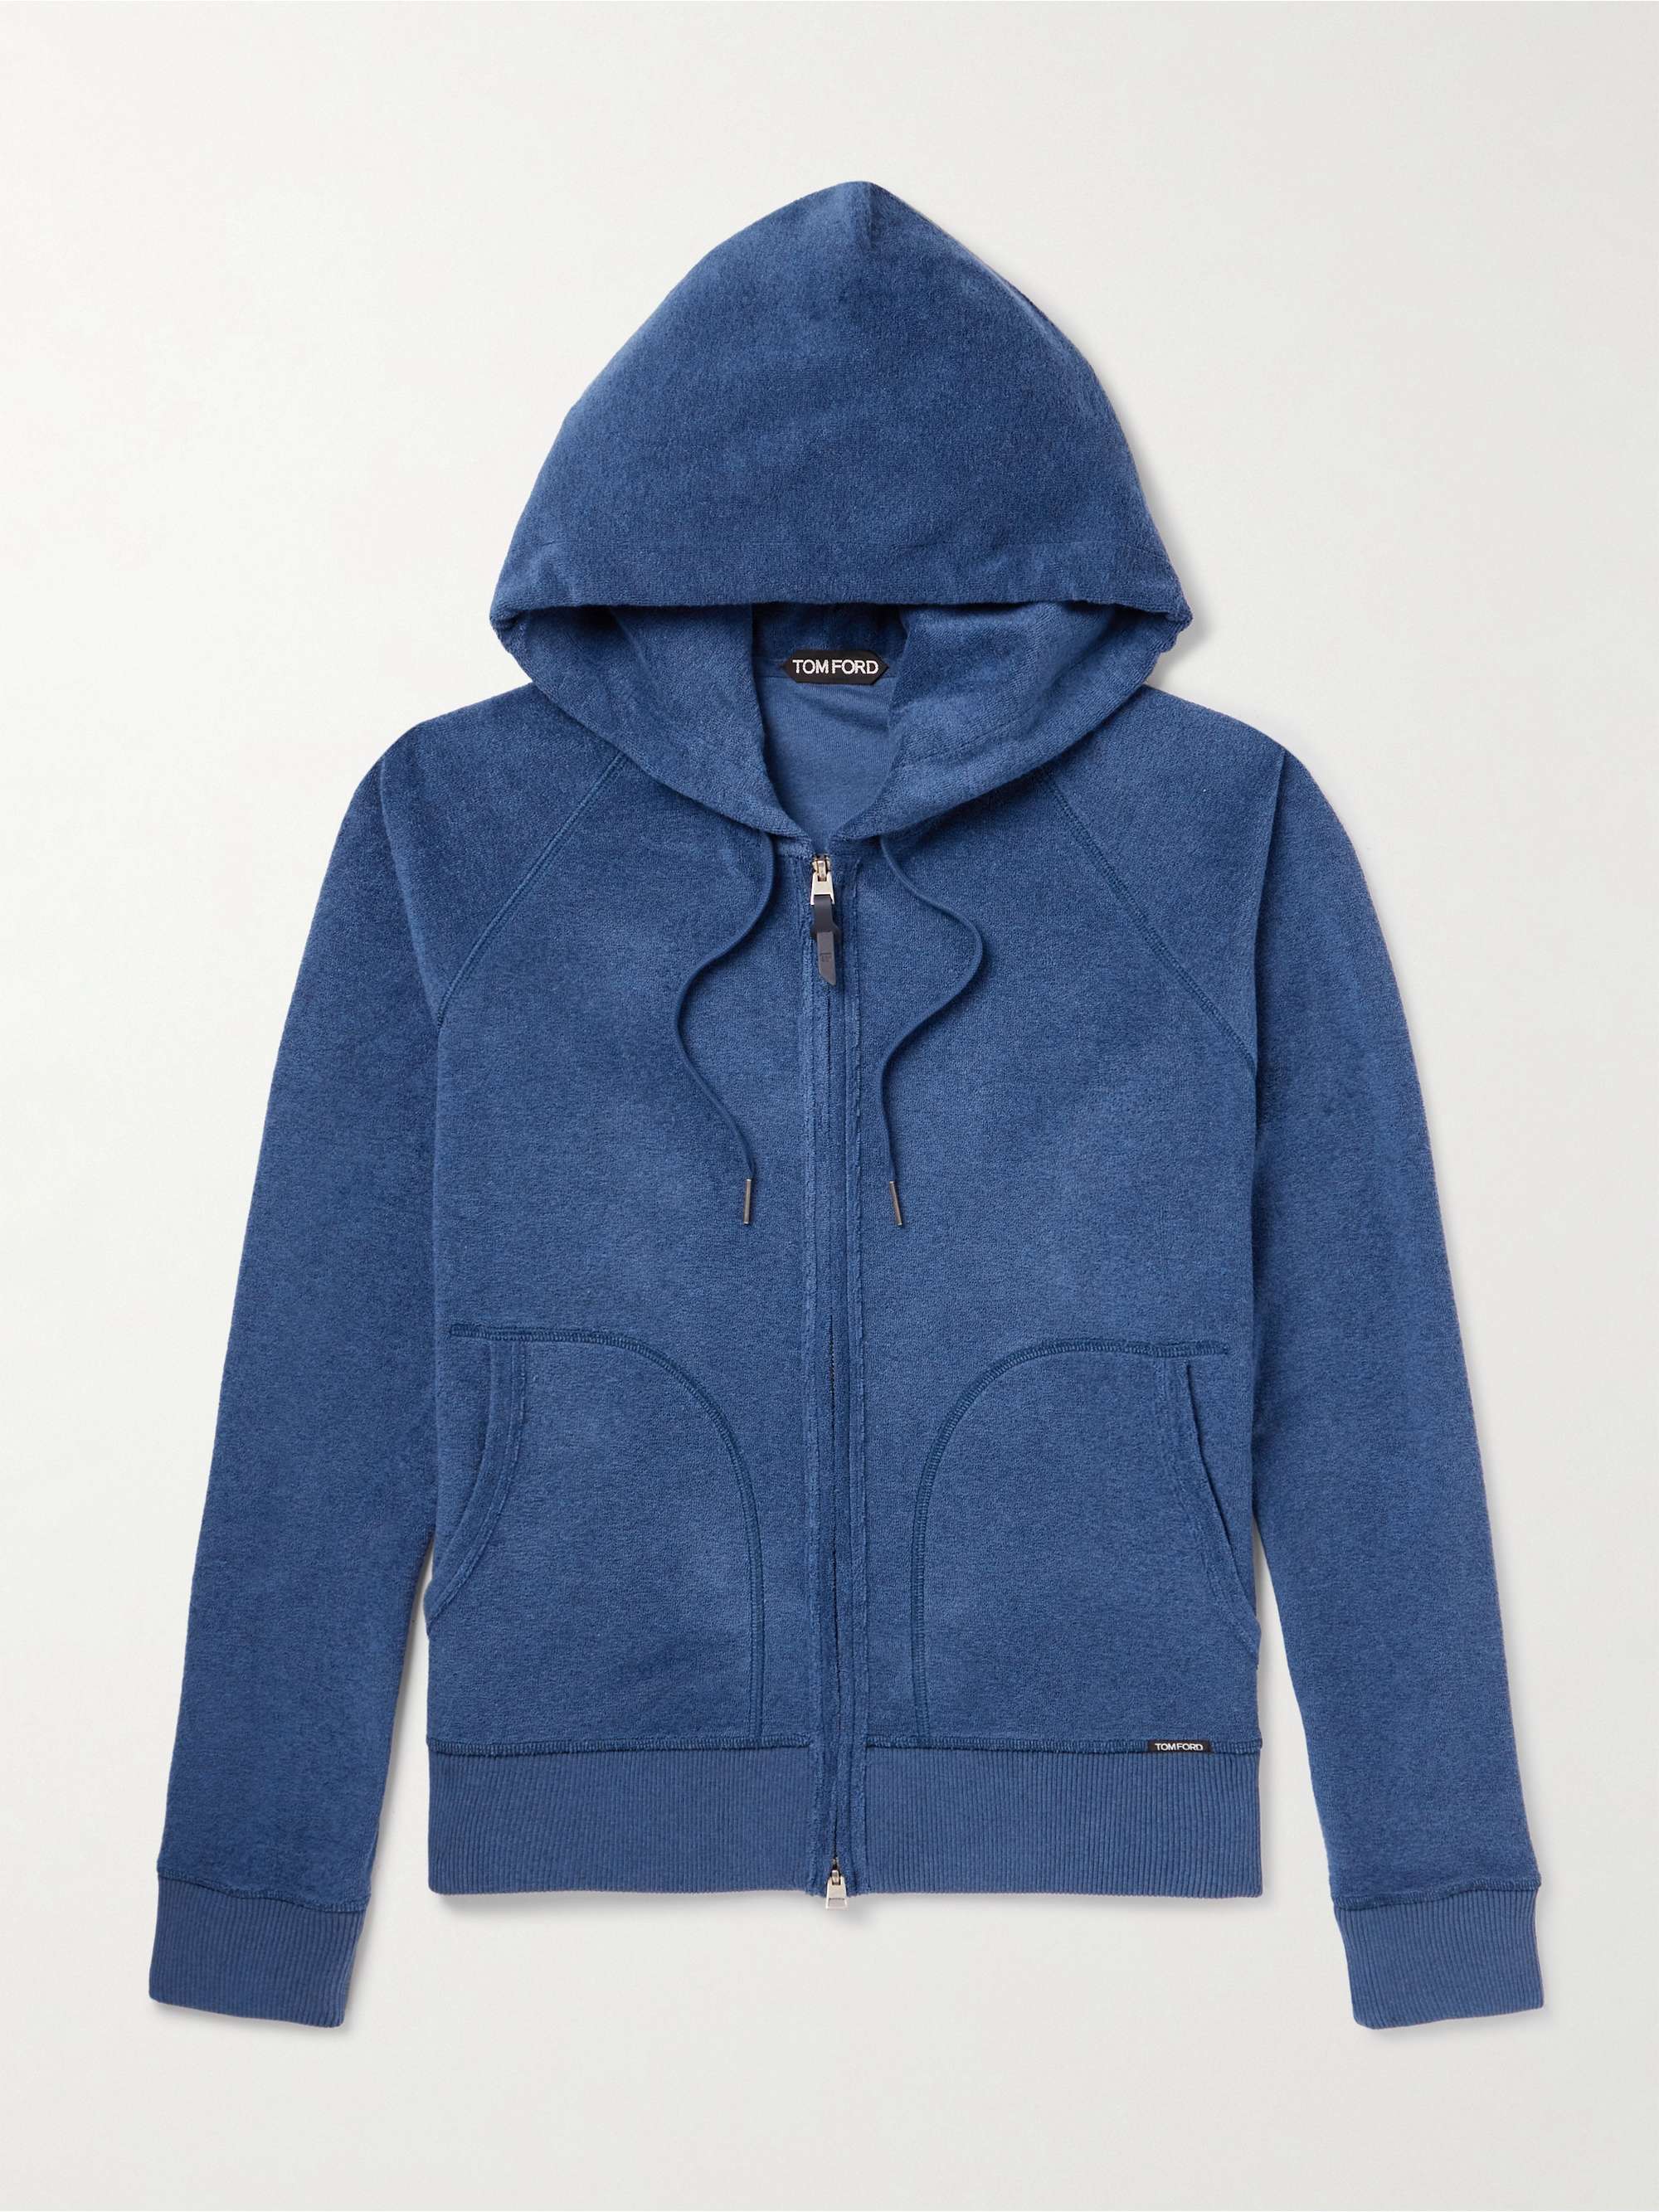 TOM FORD Cotton-Terry Zip-Up Hoodie for Men | MR PORTER